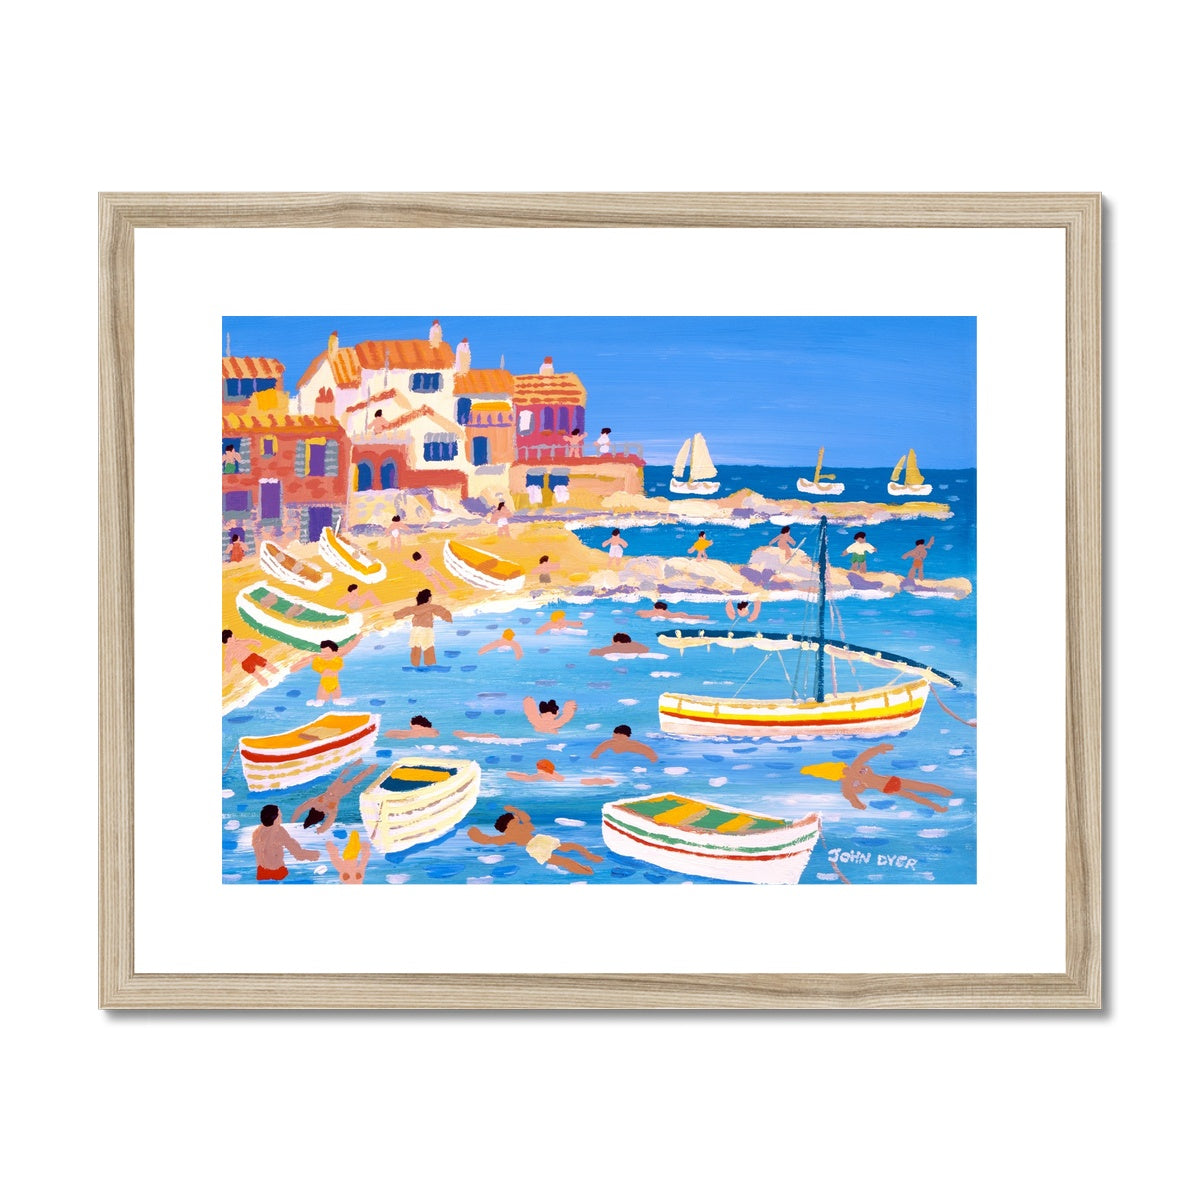 John Dyer Framed Open Edition Cornish Fine Art Print. &#39;White Washed Buildings on the Beach, Calella, Spain&#39;. Cornwall Art Gallery